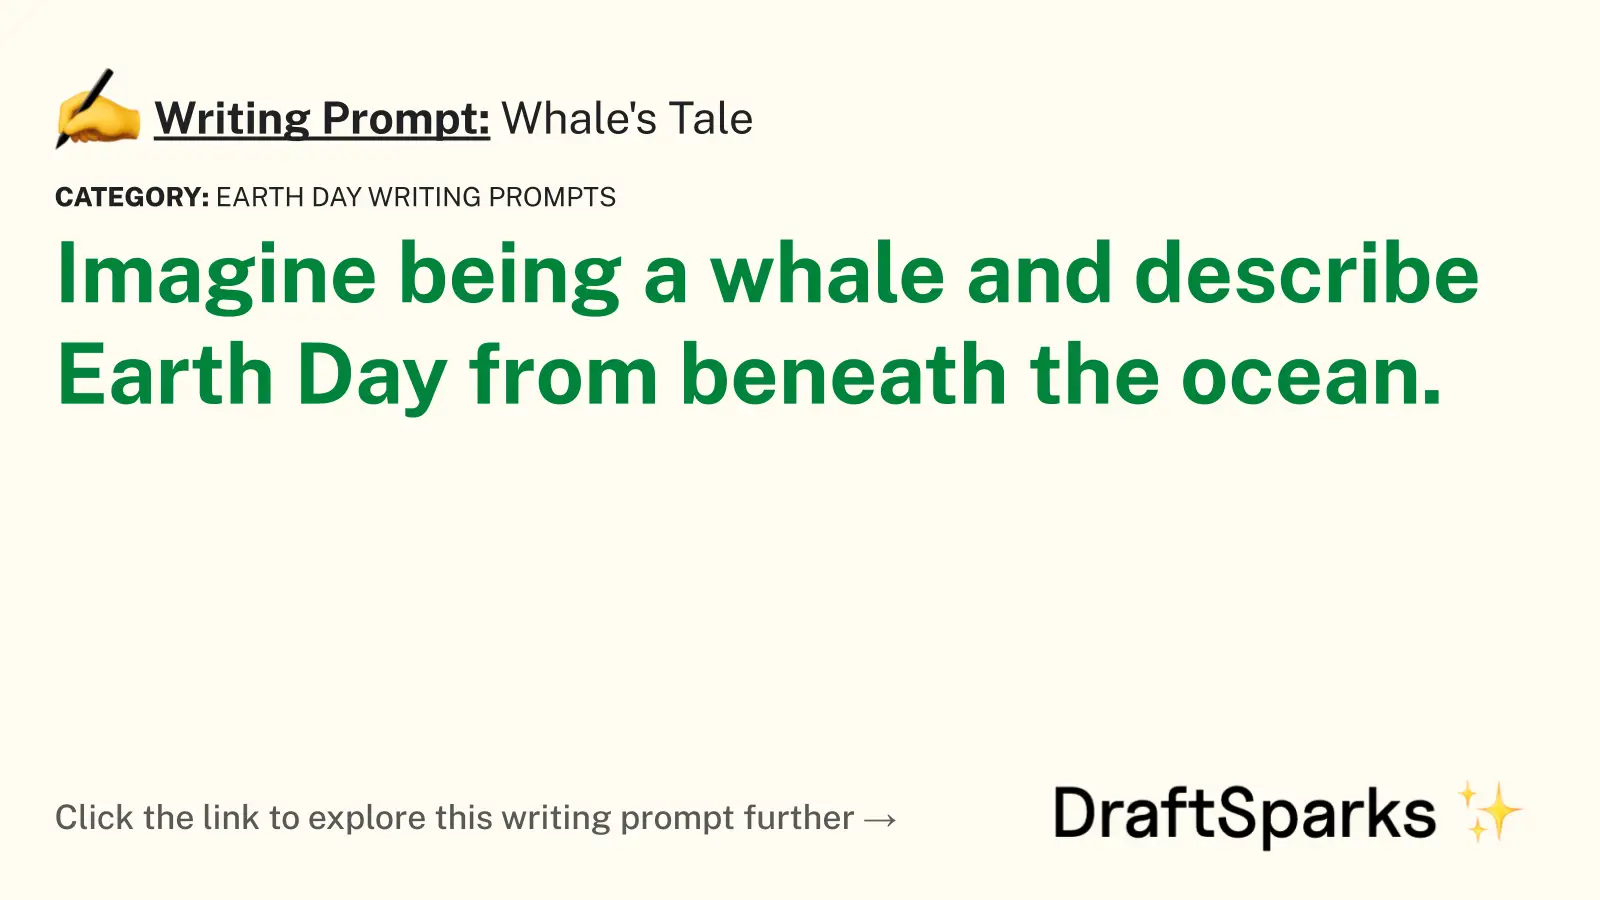 Whale’s Tale